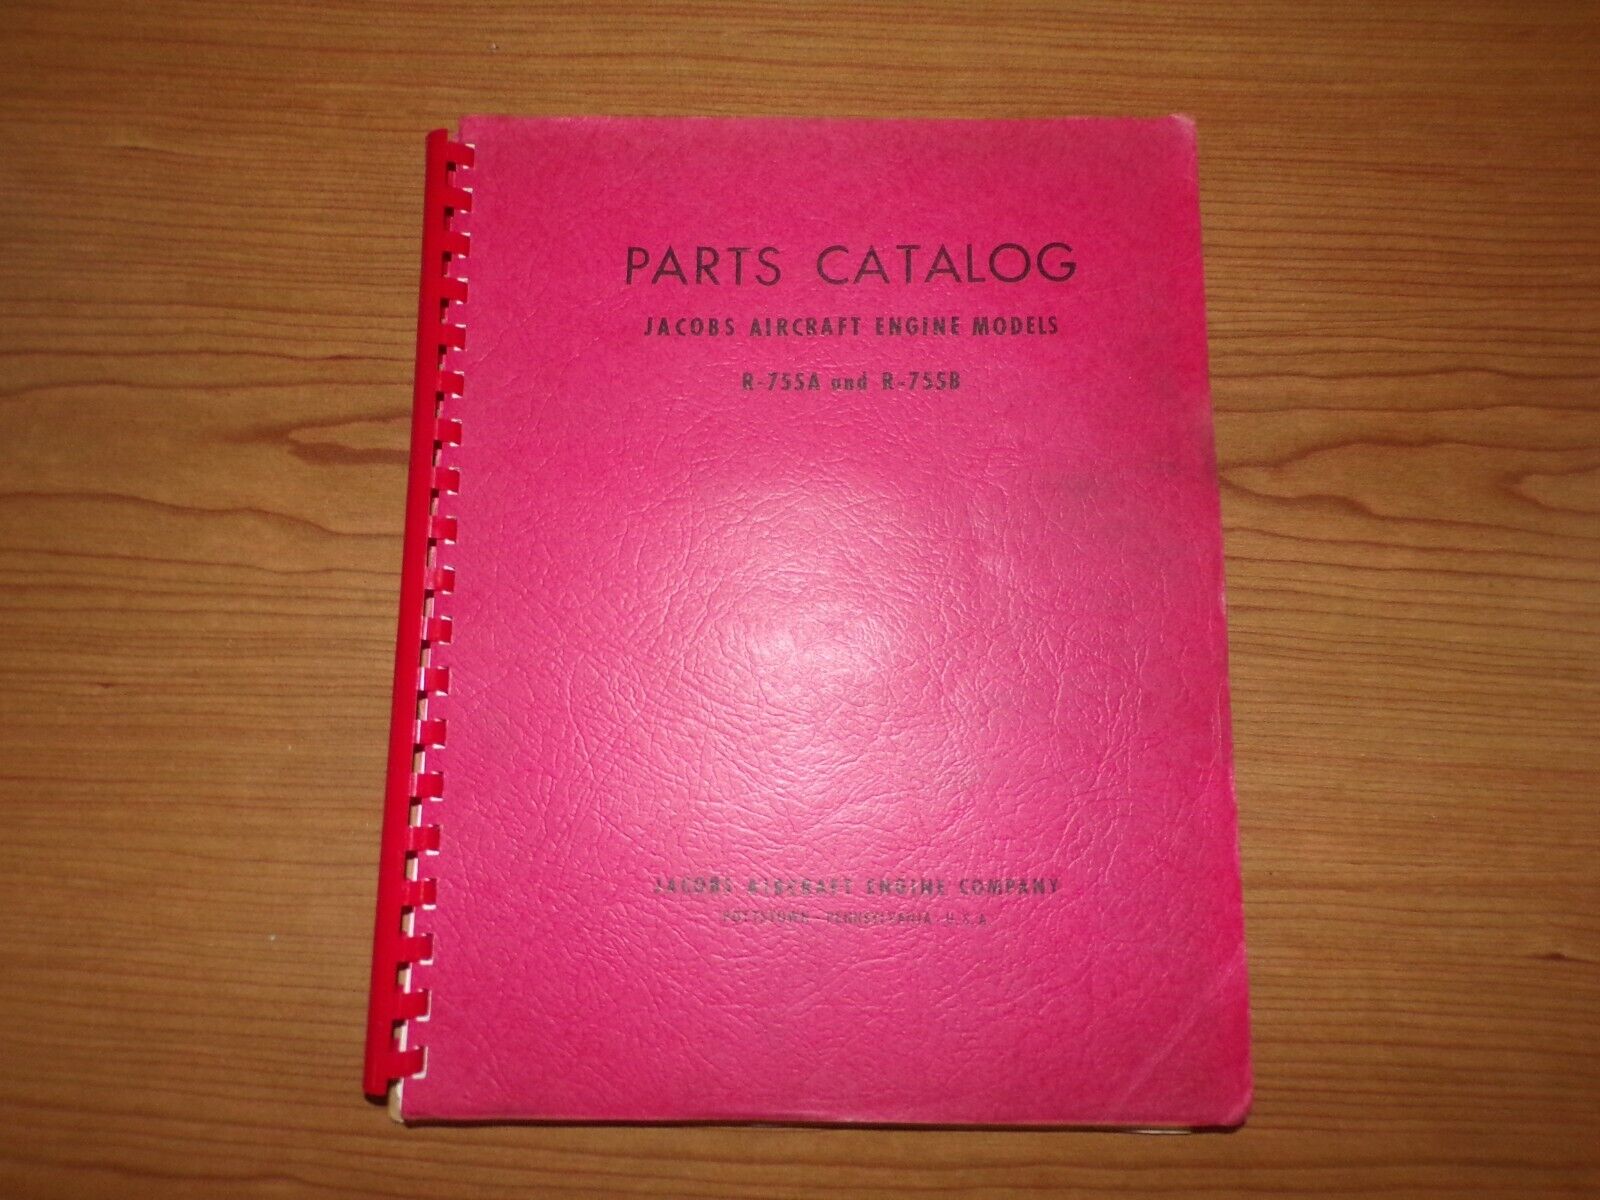 Jacobs Aircraft Engines Parts Catalog R-755A and R-755B